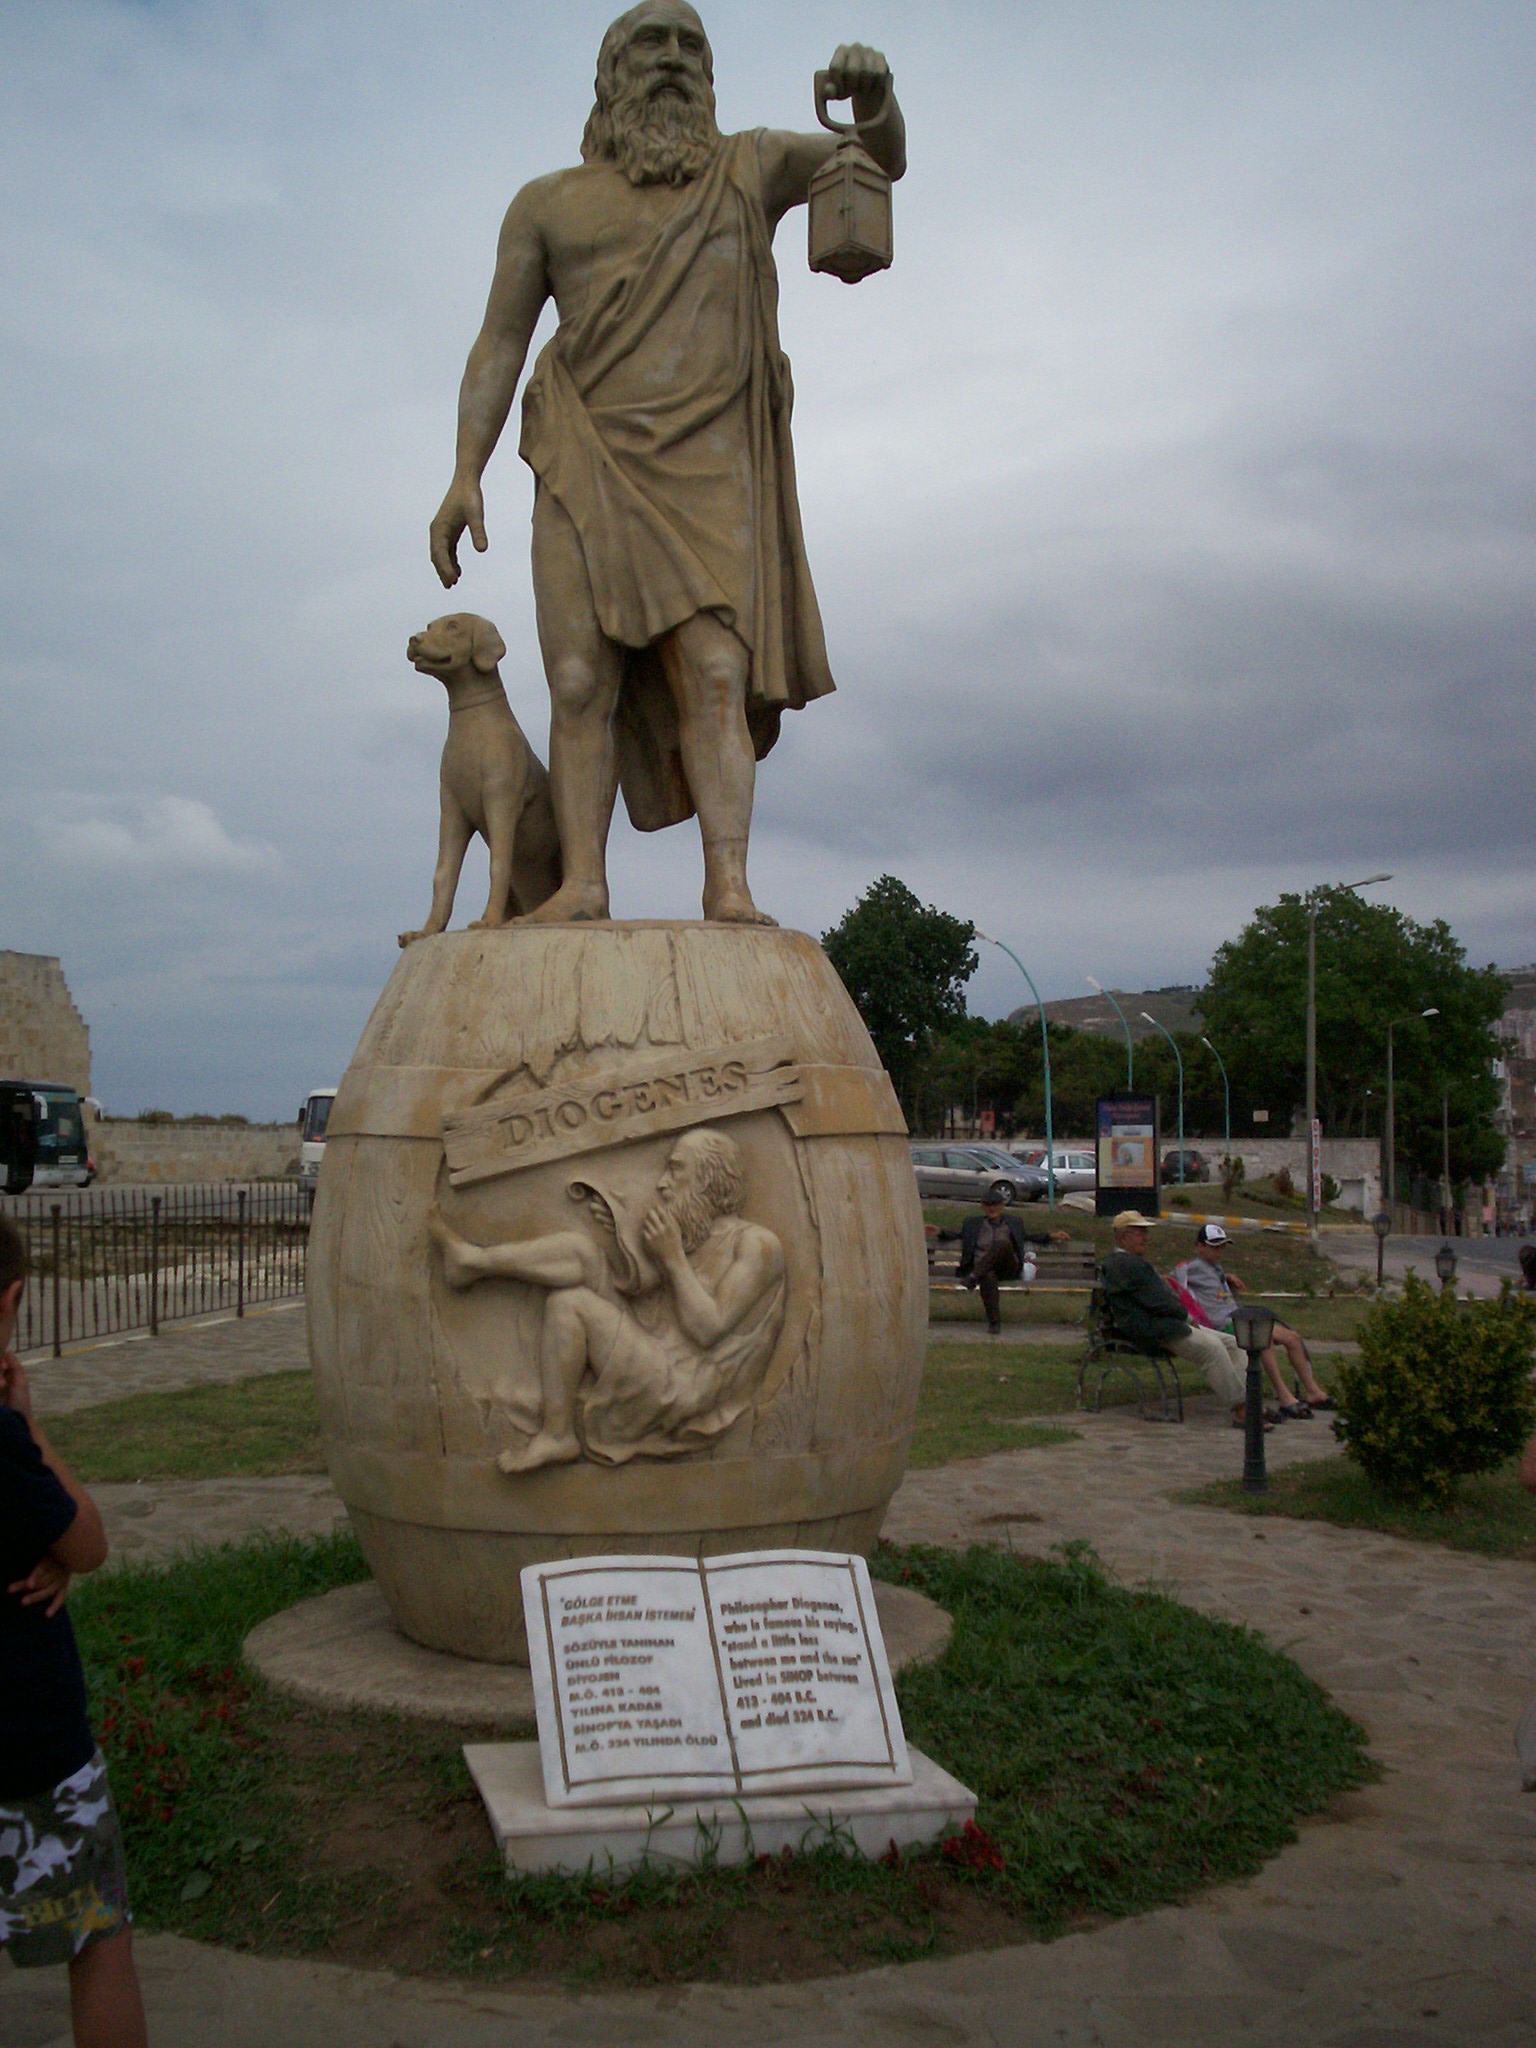 Diogenes of Sinope statue